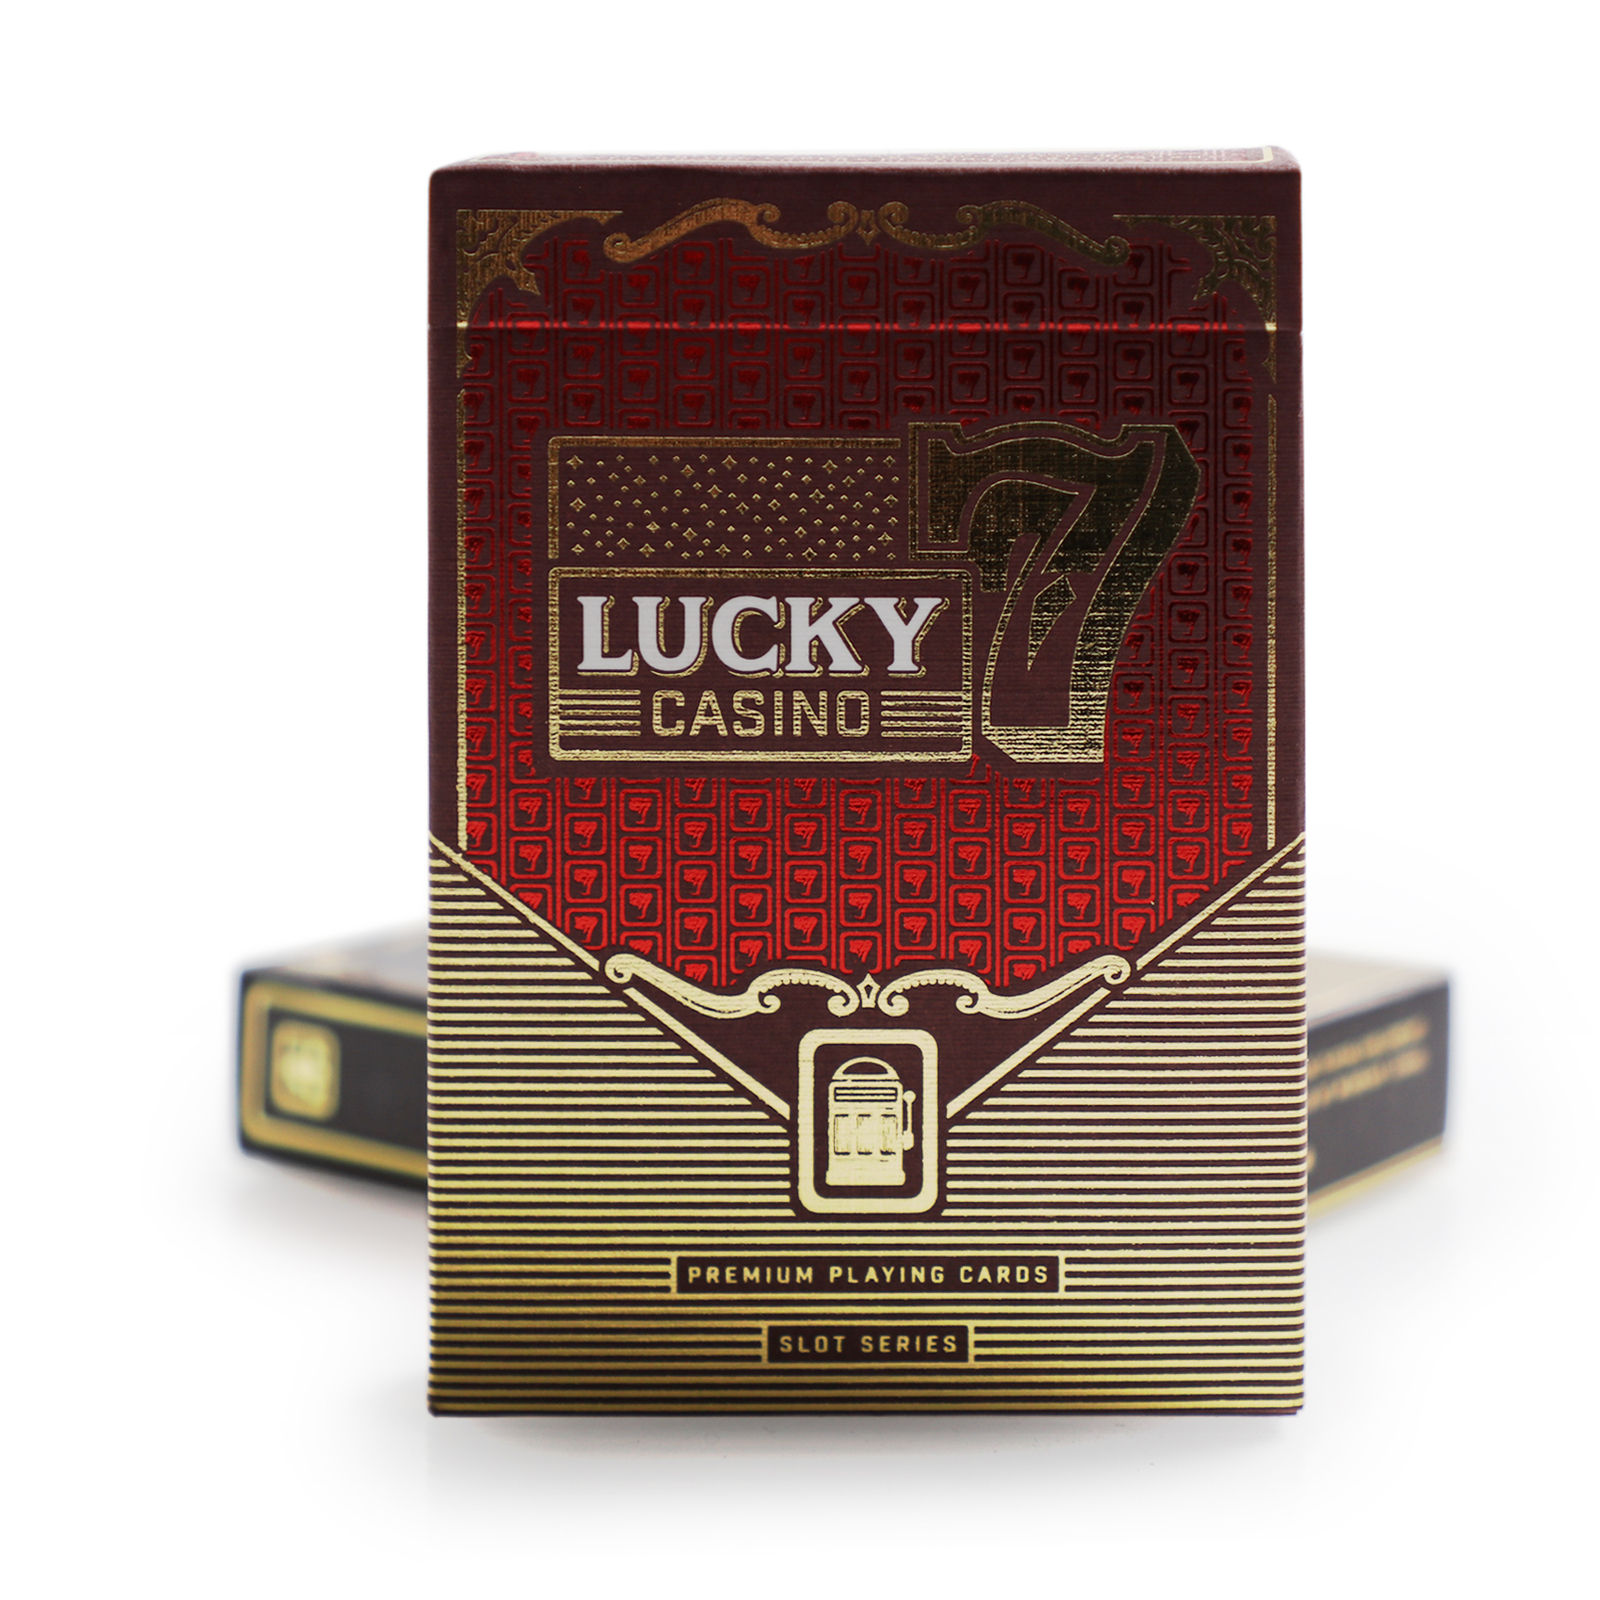 NEW DECK OF LAS VEGAS LUCKY NOS 7 & 11 PLAYING CARDS